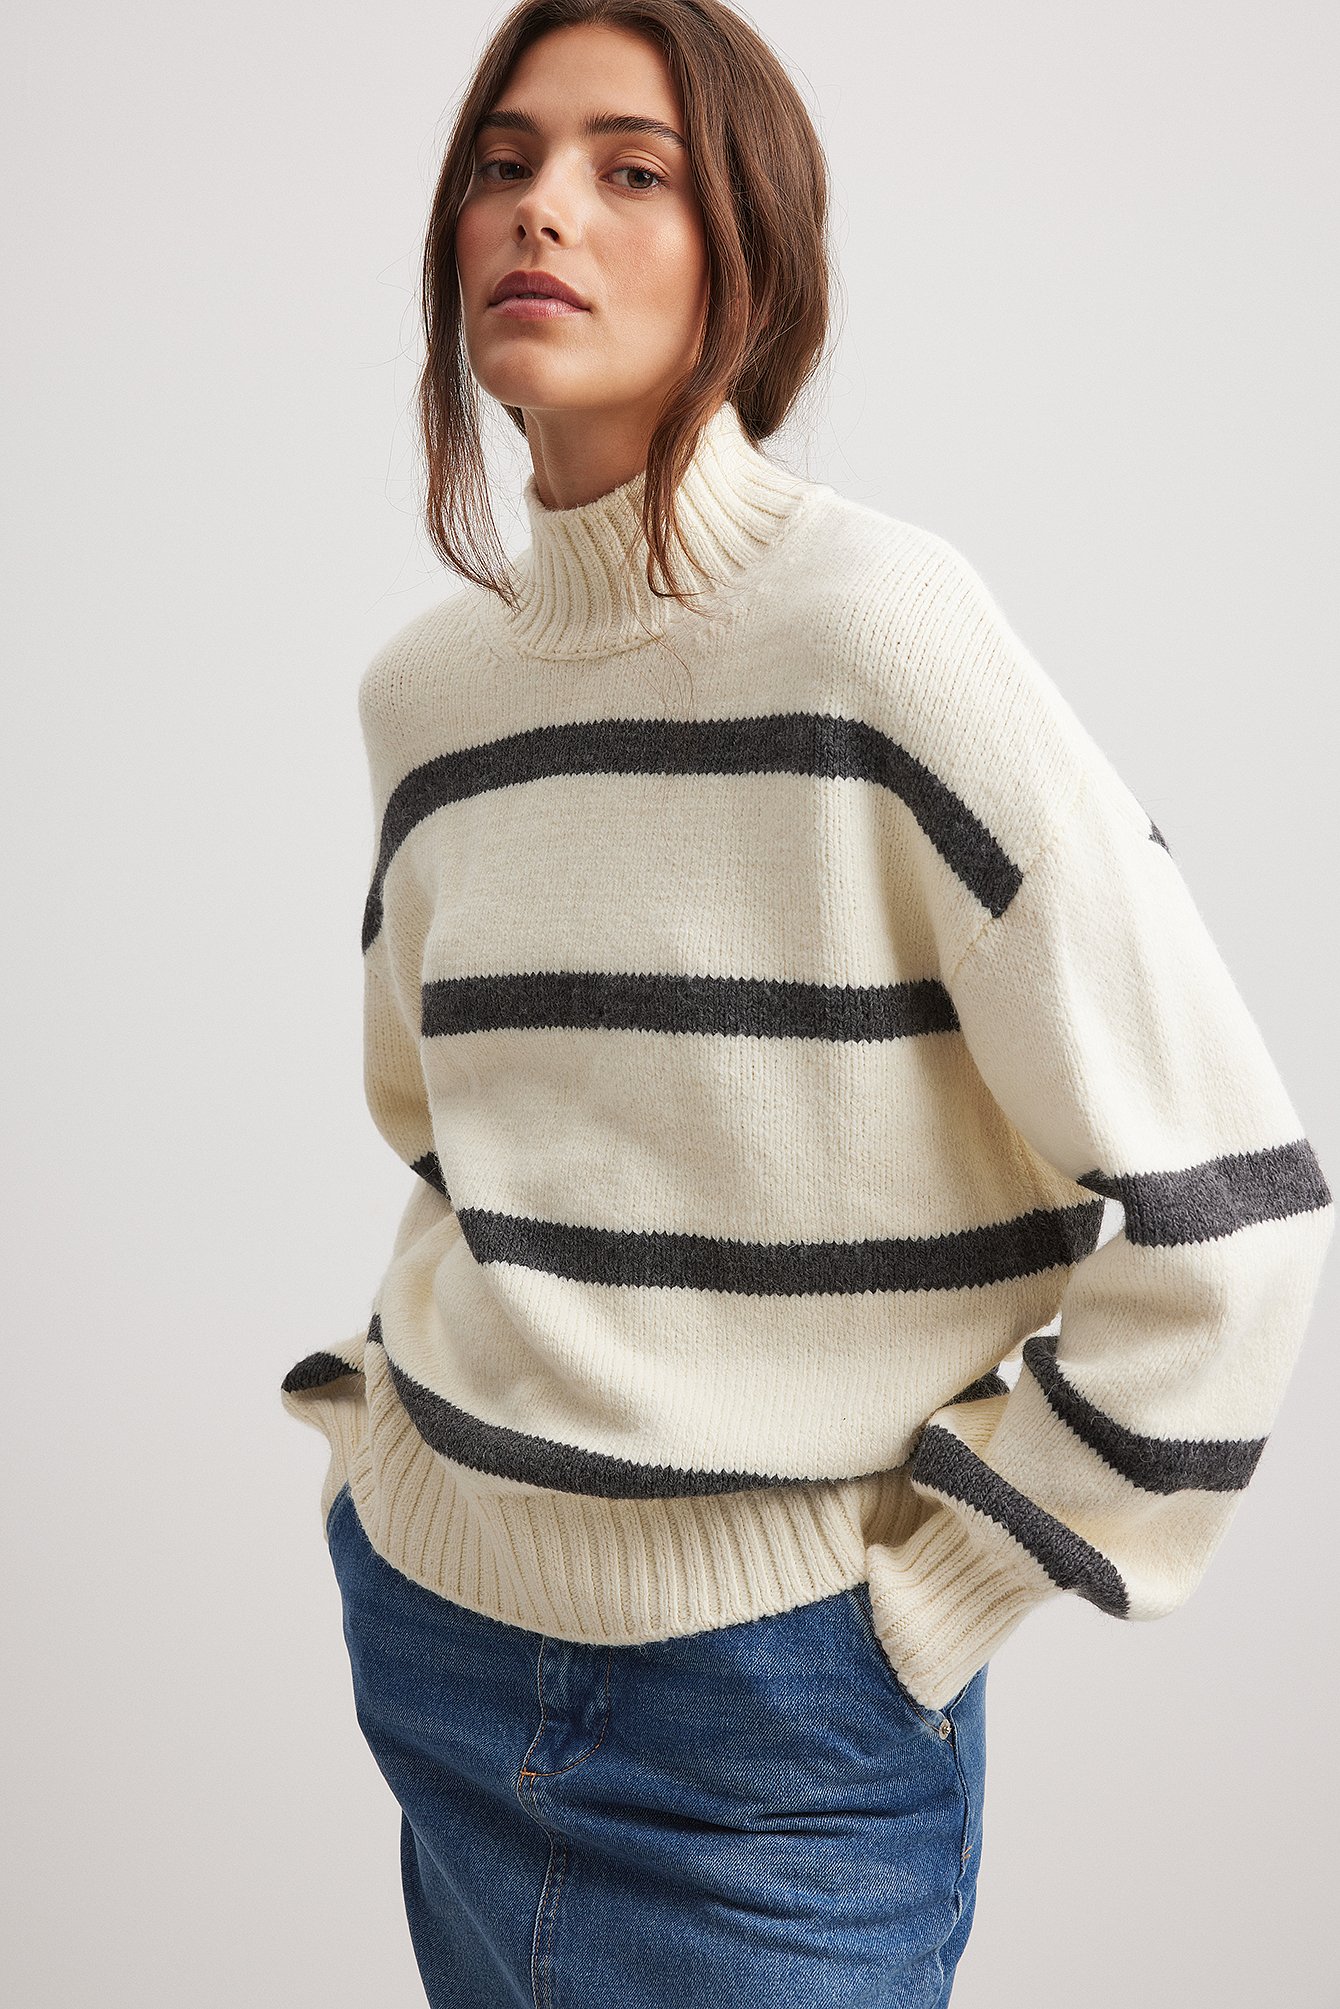 White/Grey Turtle Neck Knitted Striped Sweater